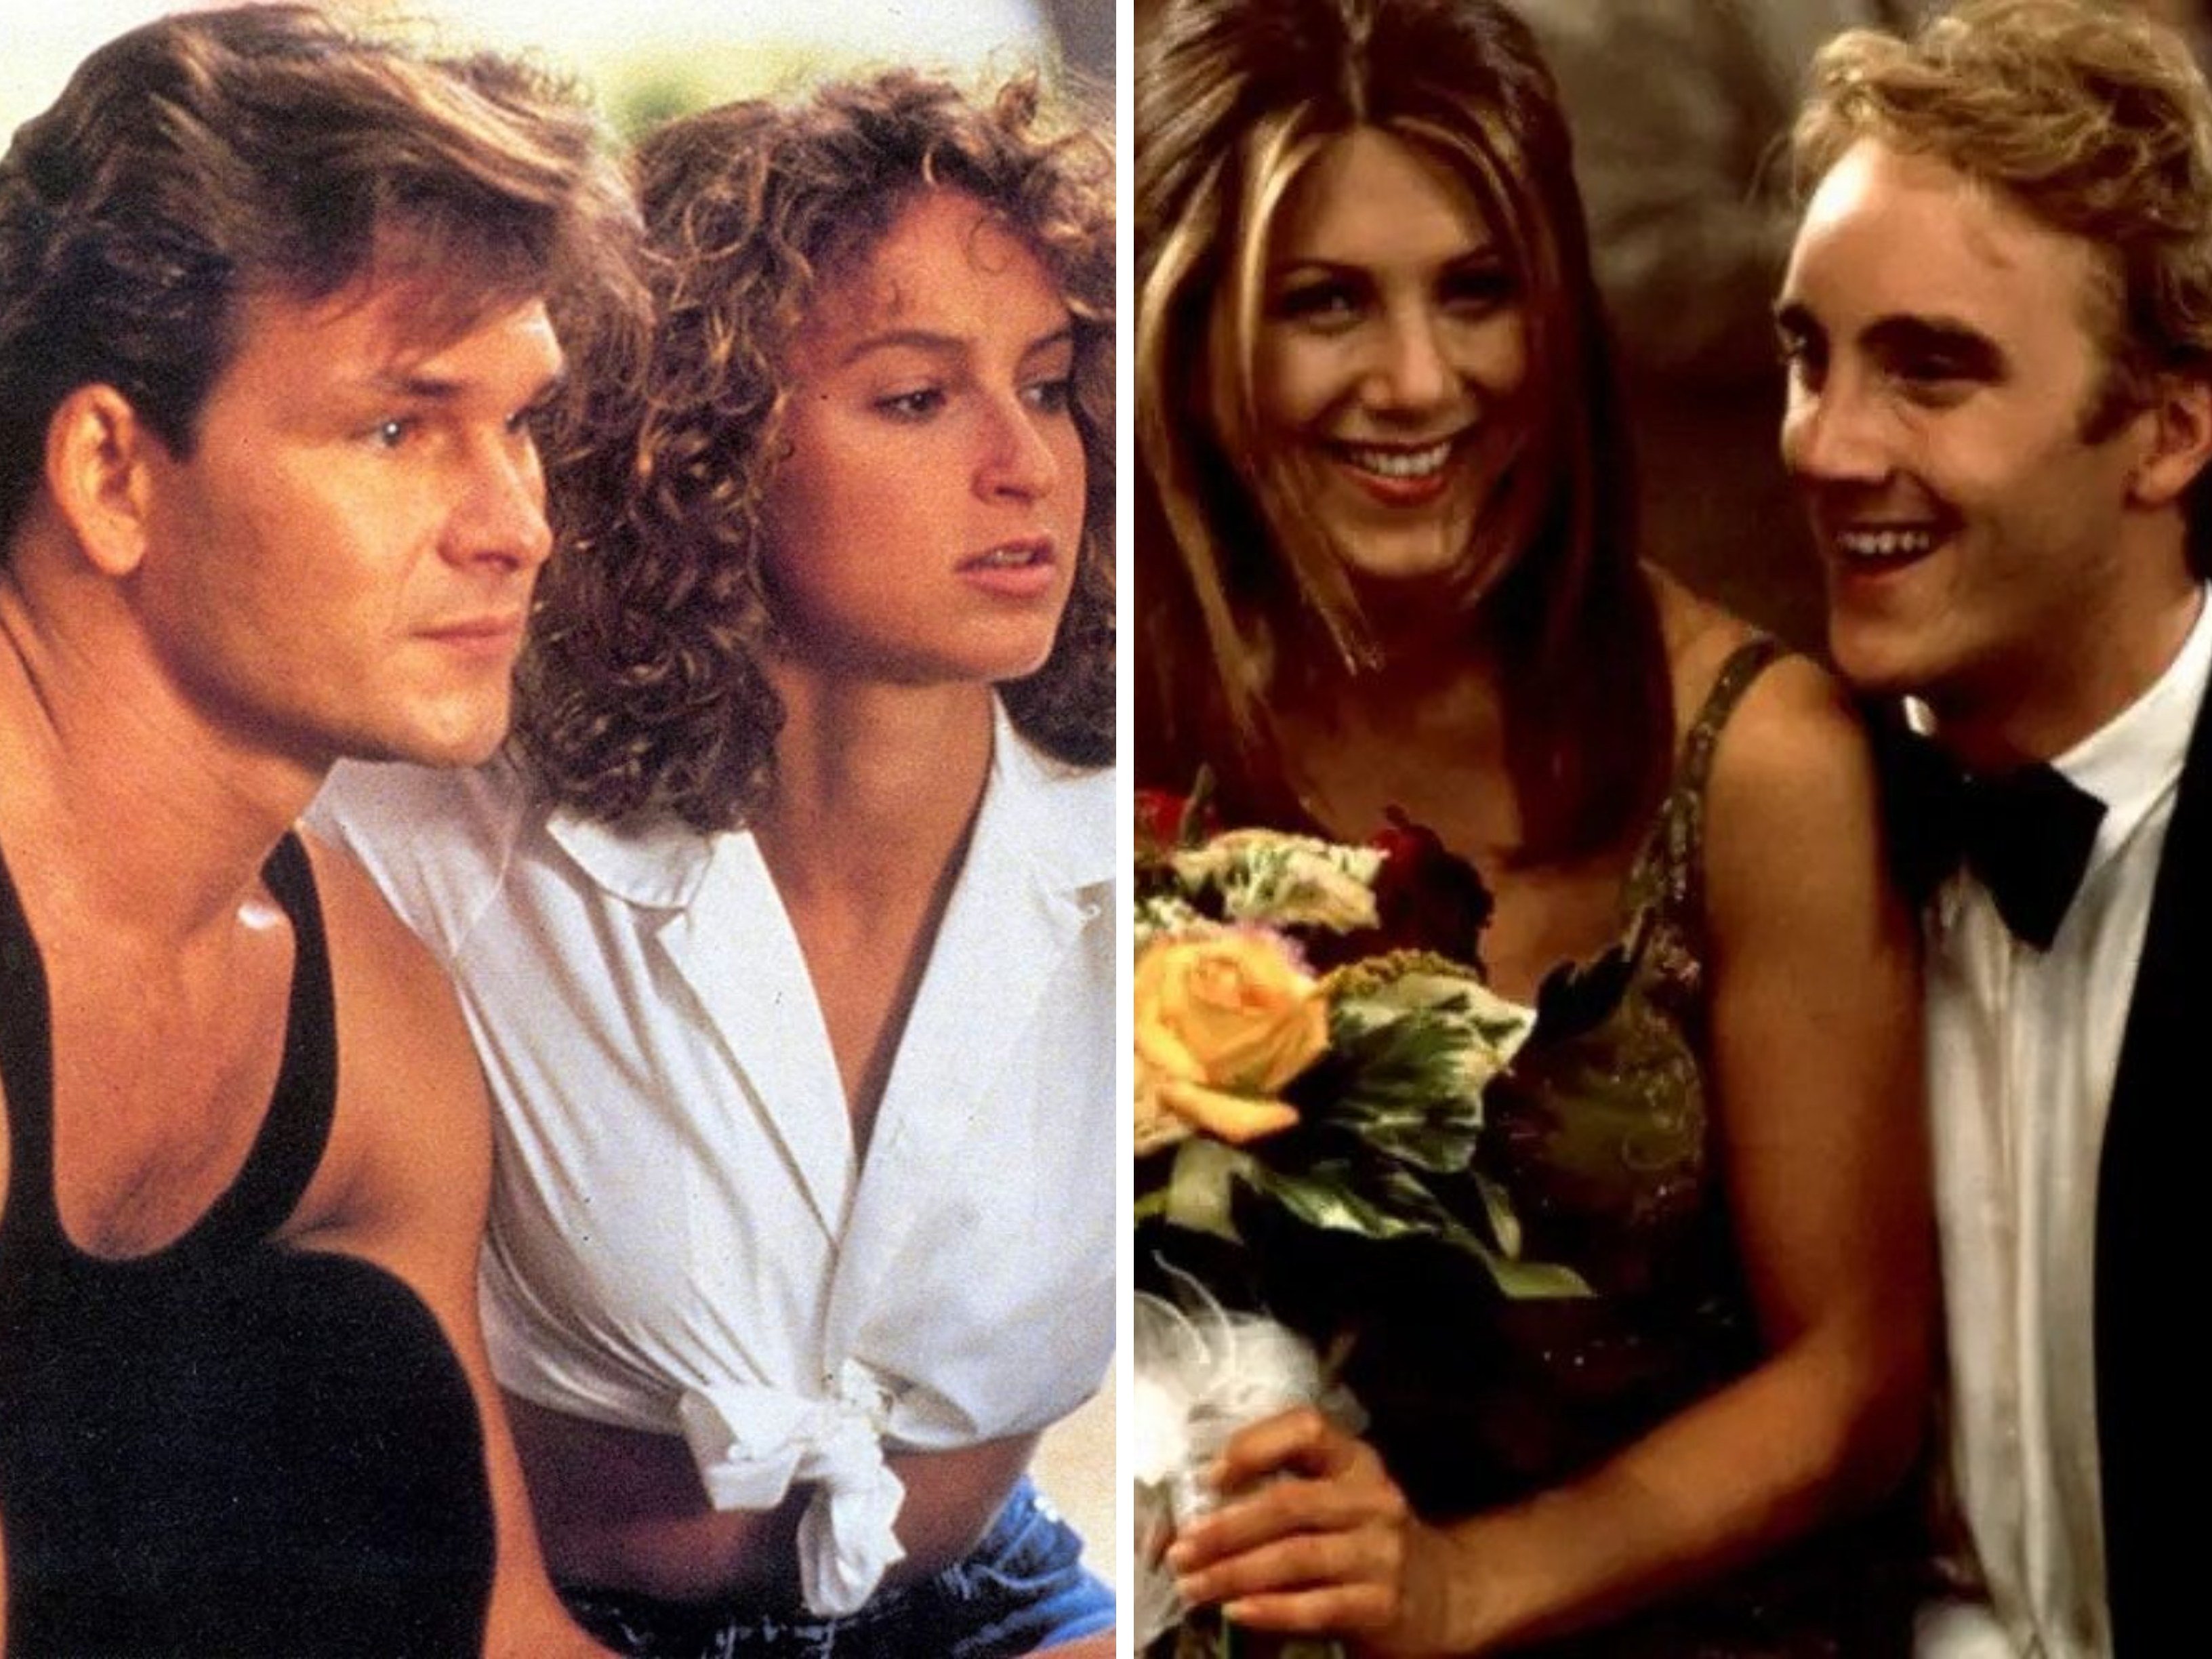 Patrick Swayze and Jennifer Grey in Dirty Dancing, and Jennifer Aniston and Jay Mohr in Picture Perfect. Photos: @dirtydancingmovie/Instagram, 20th Century Fox